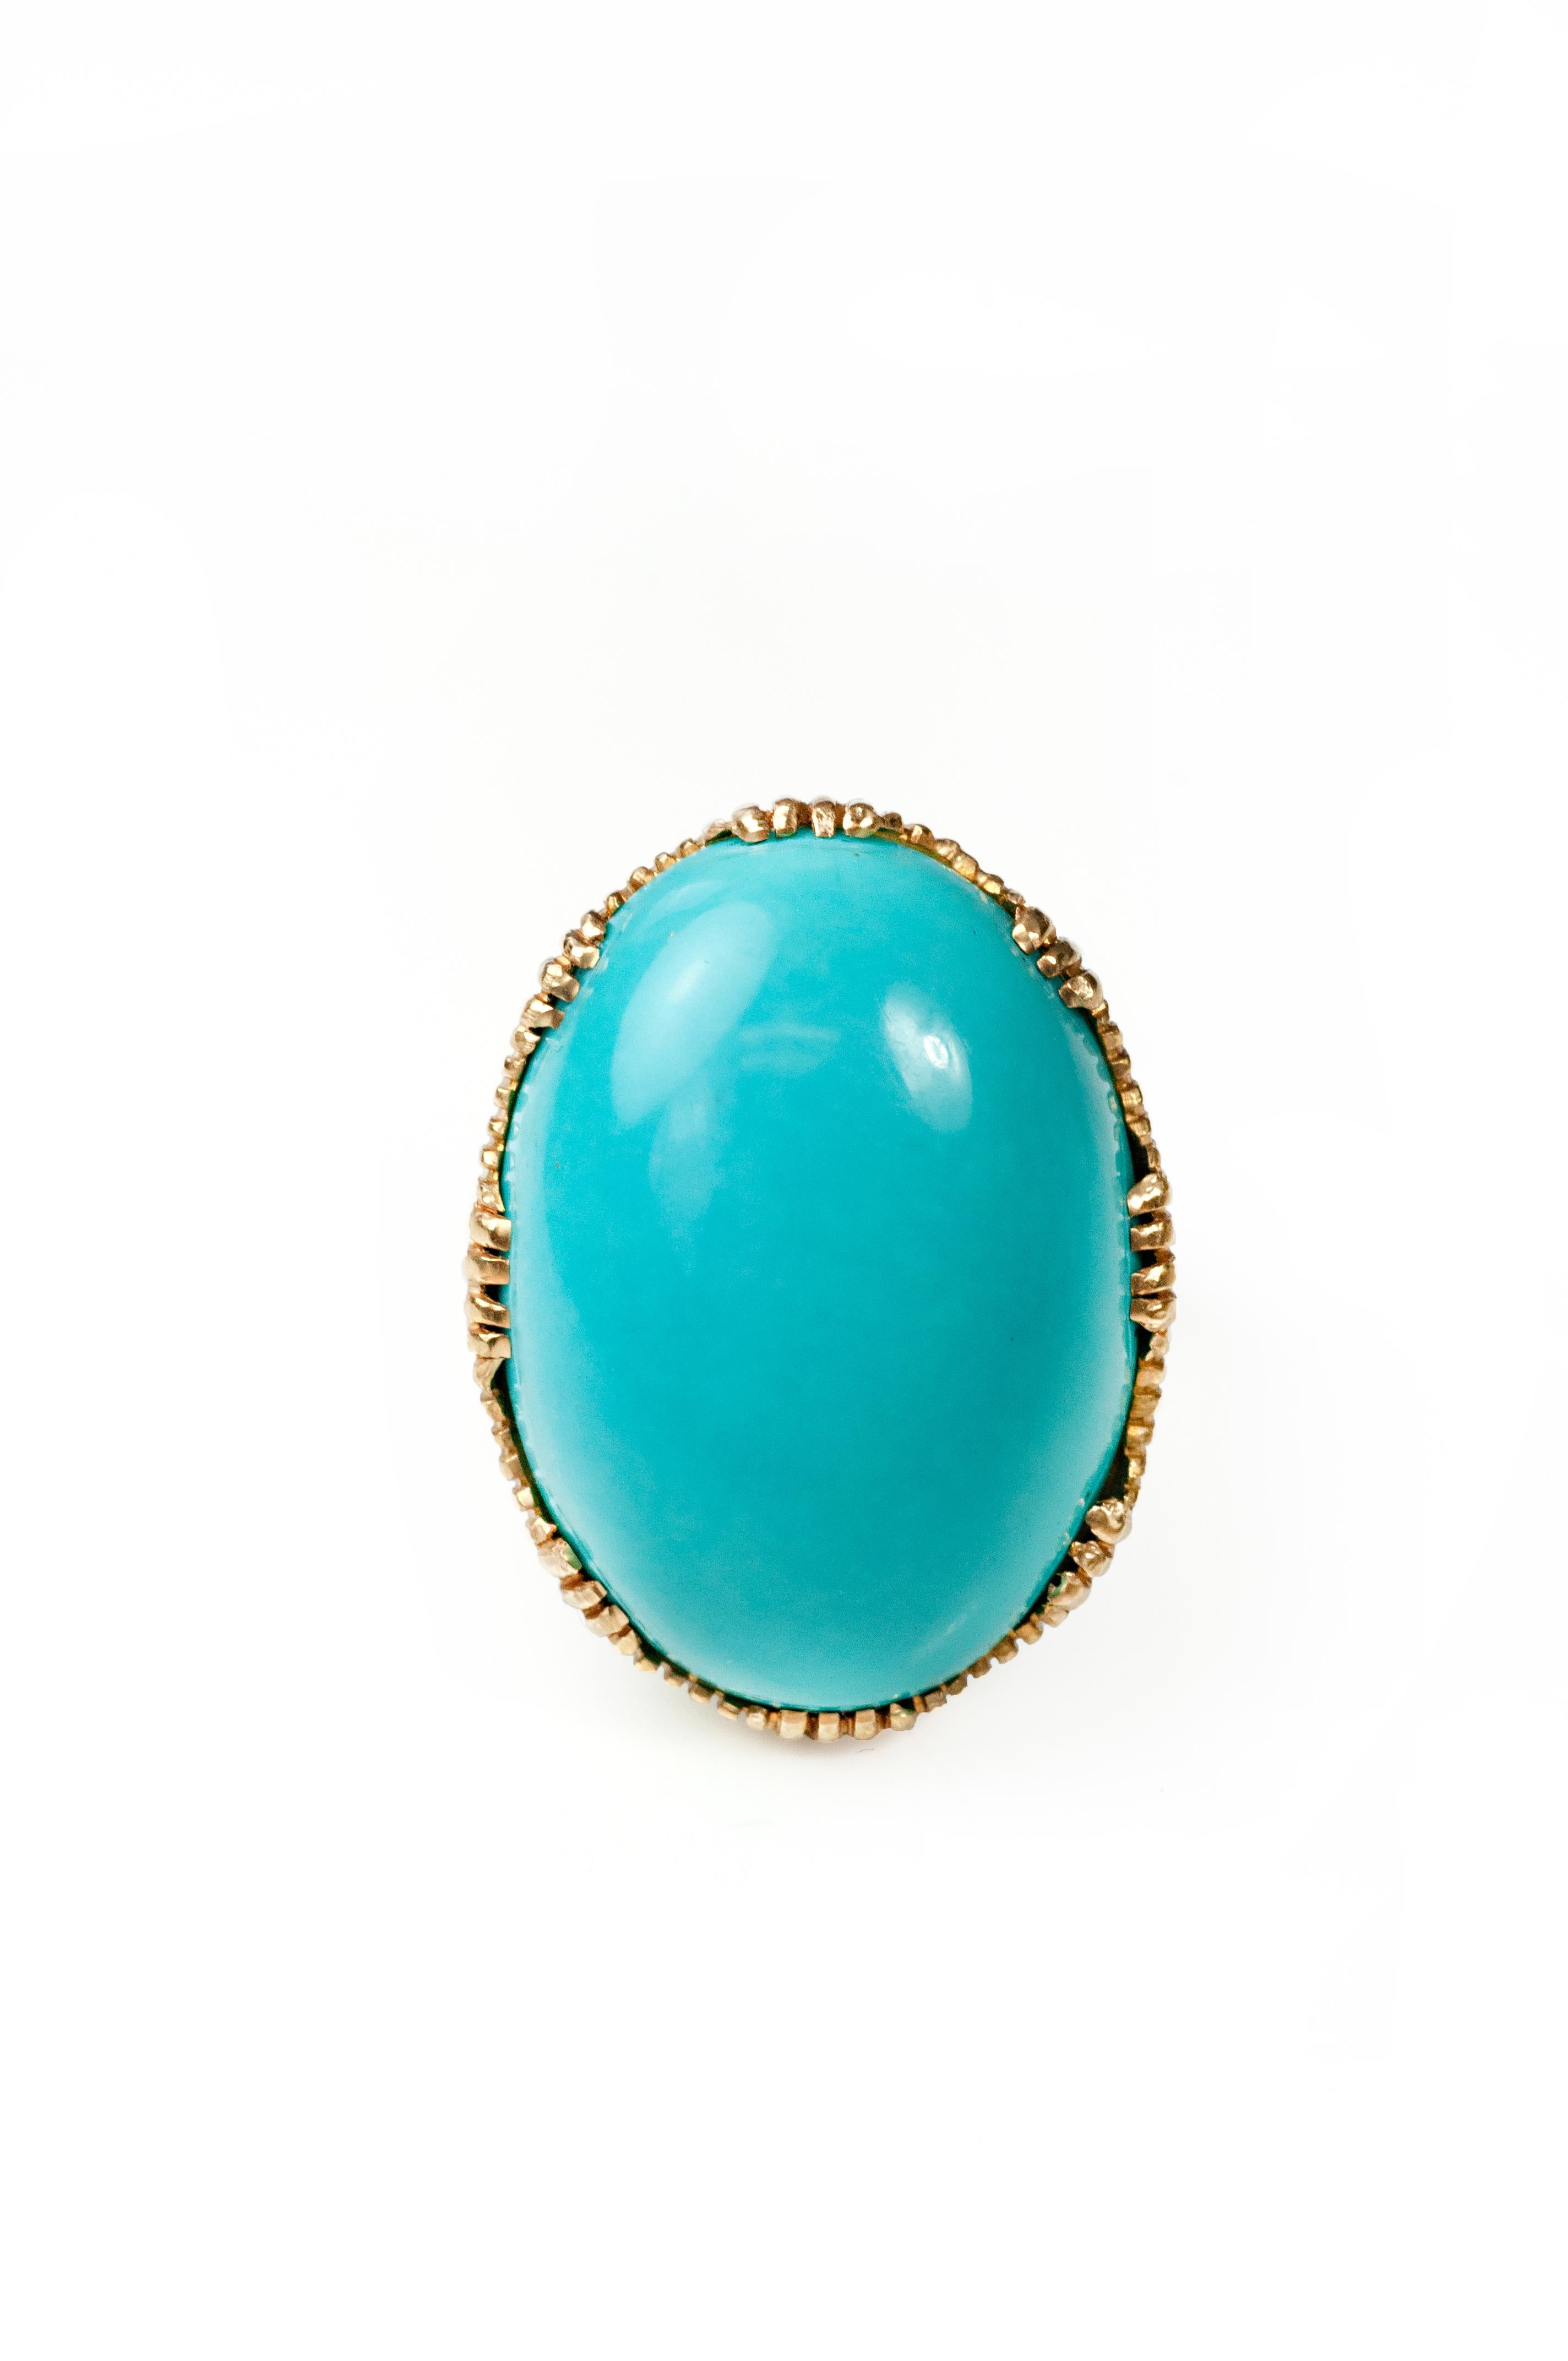 Sleeping beauty turquoise cabochon 23.00cts with 18K gold basket and 10K gold shank. Size 6.75.  

Sleeping Beauty turquoise is noted for its solid, light blue color with no matrix. It is a favorite of Zuni Pueblo lapidaries and silversmiths for the